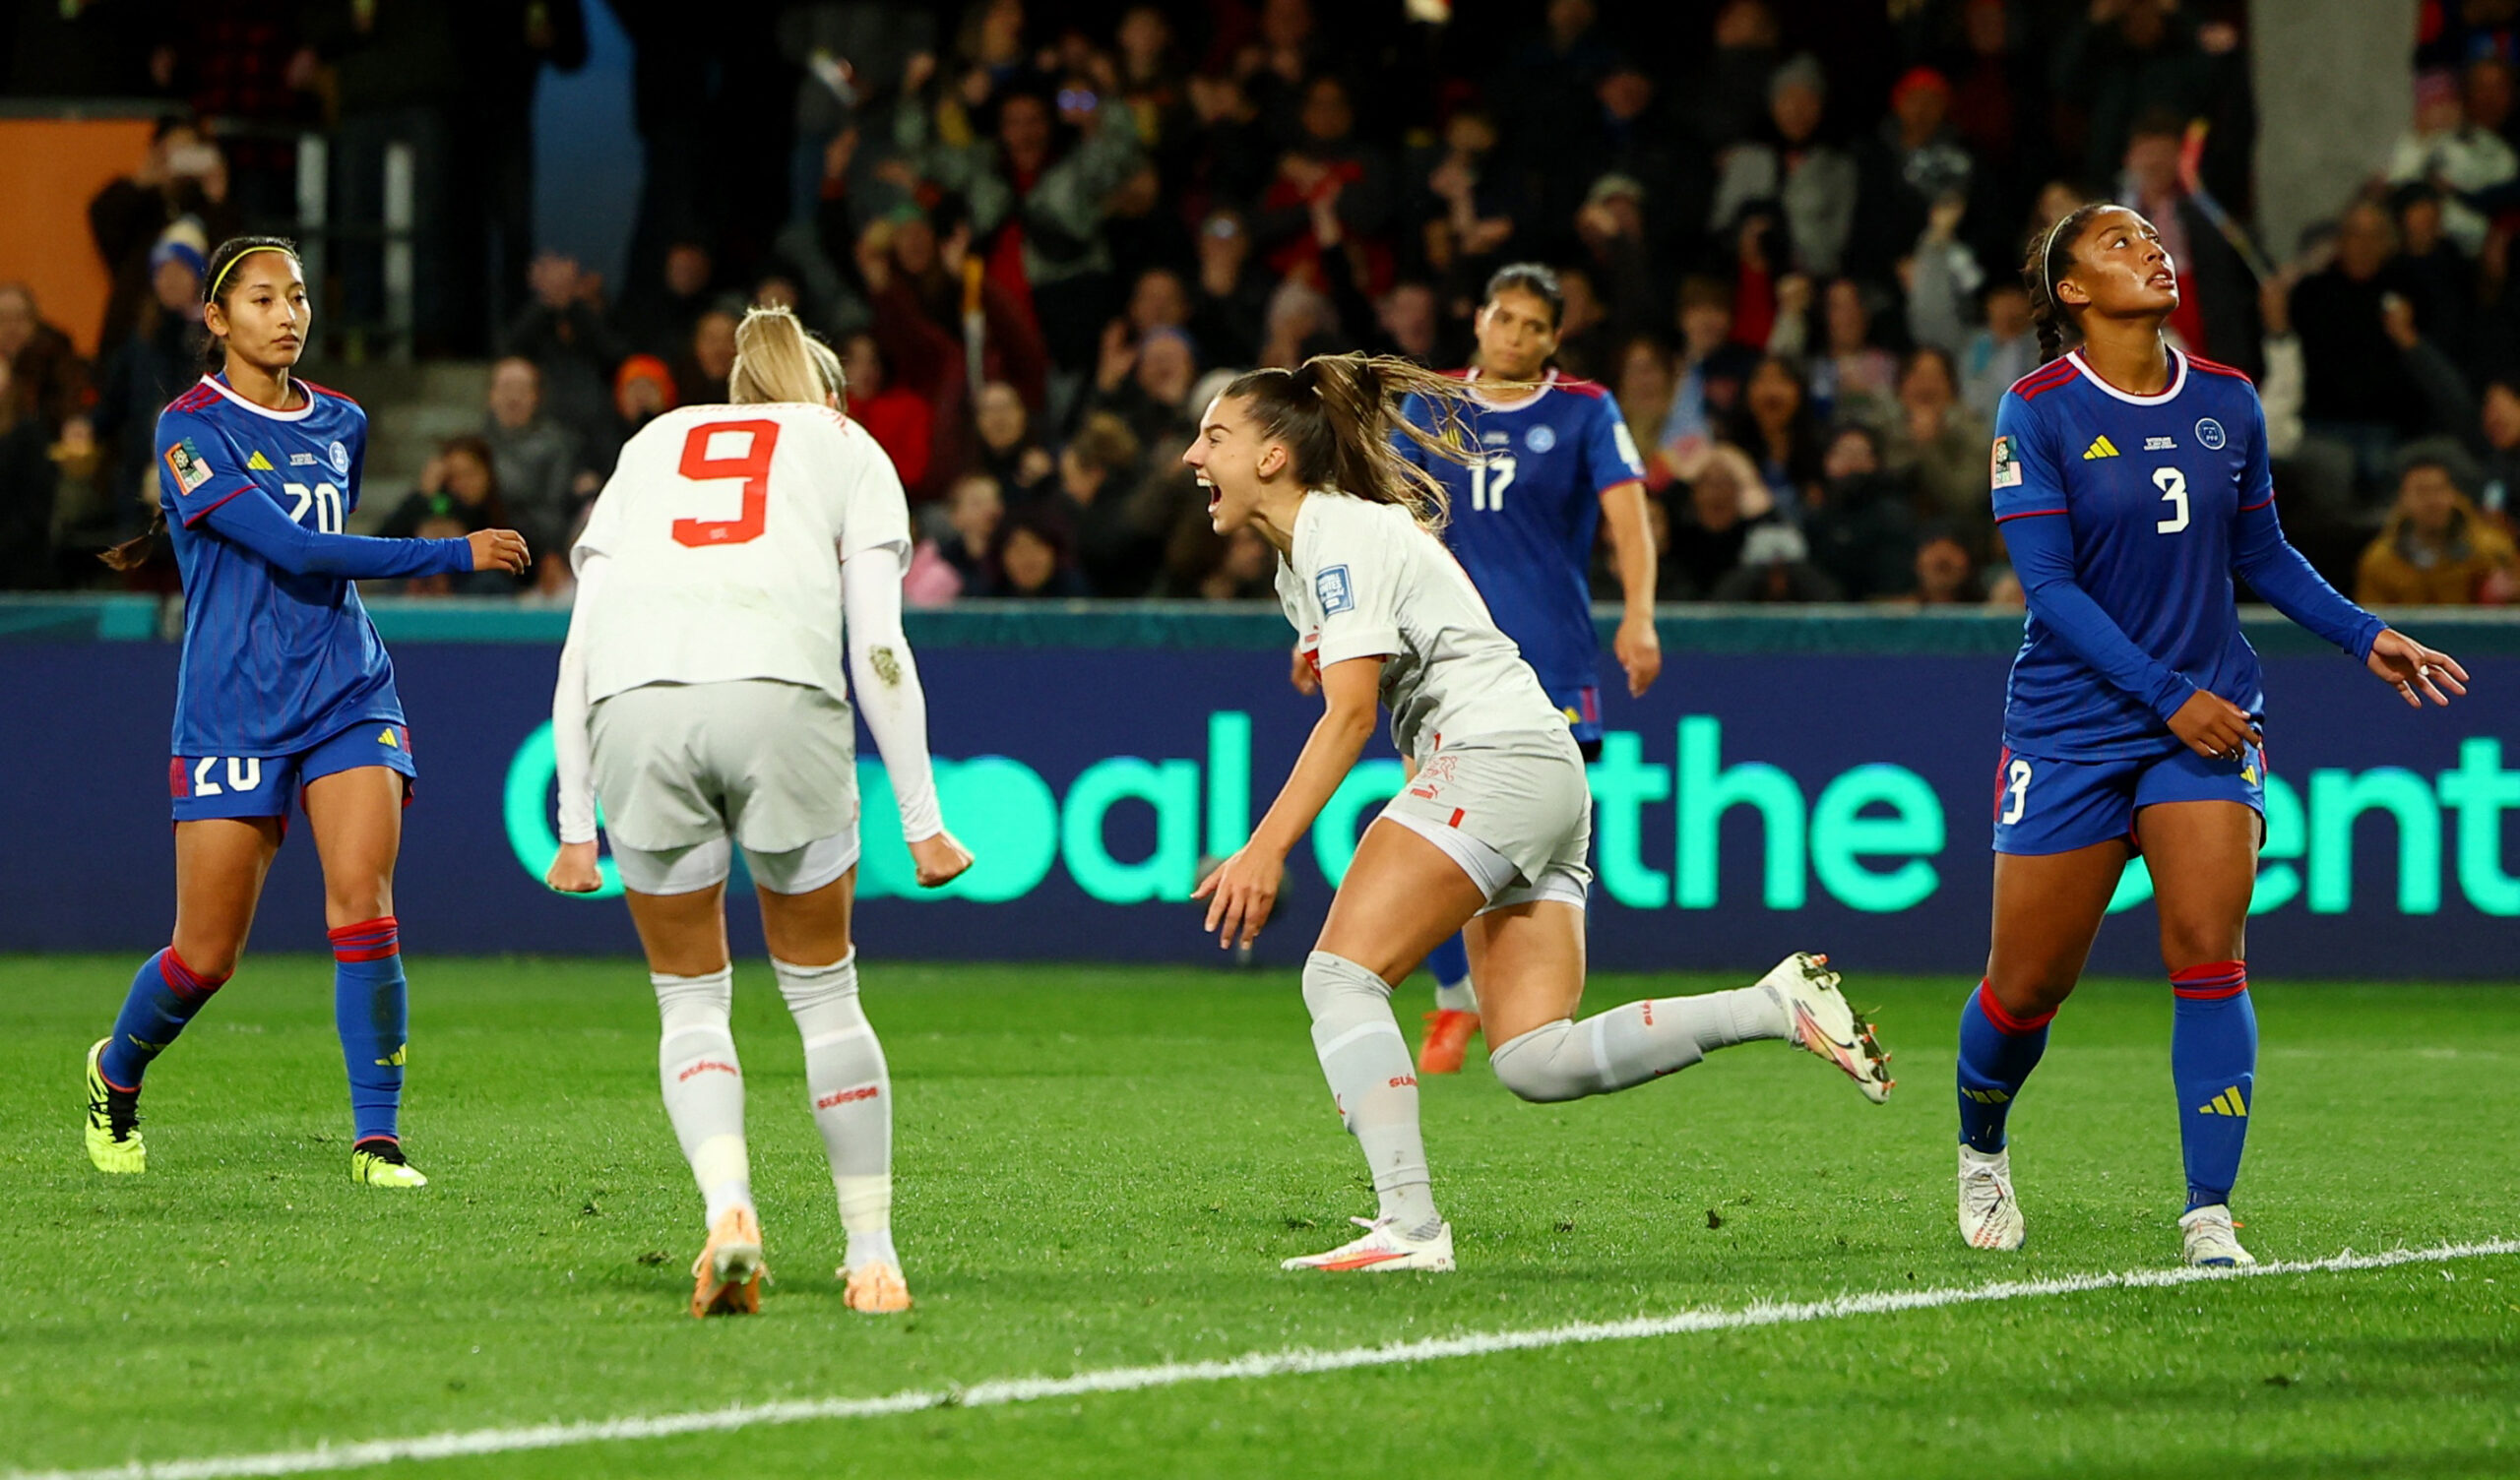 Philippines falls to Switzerland in its Fifa Women's World Cup debut